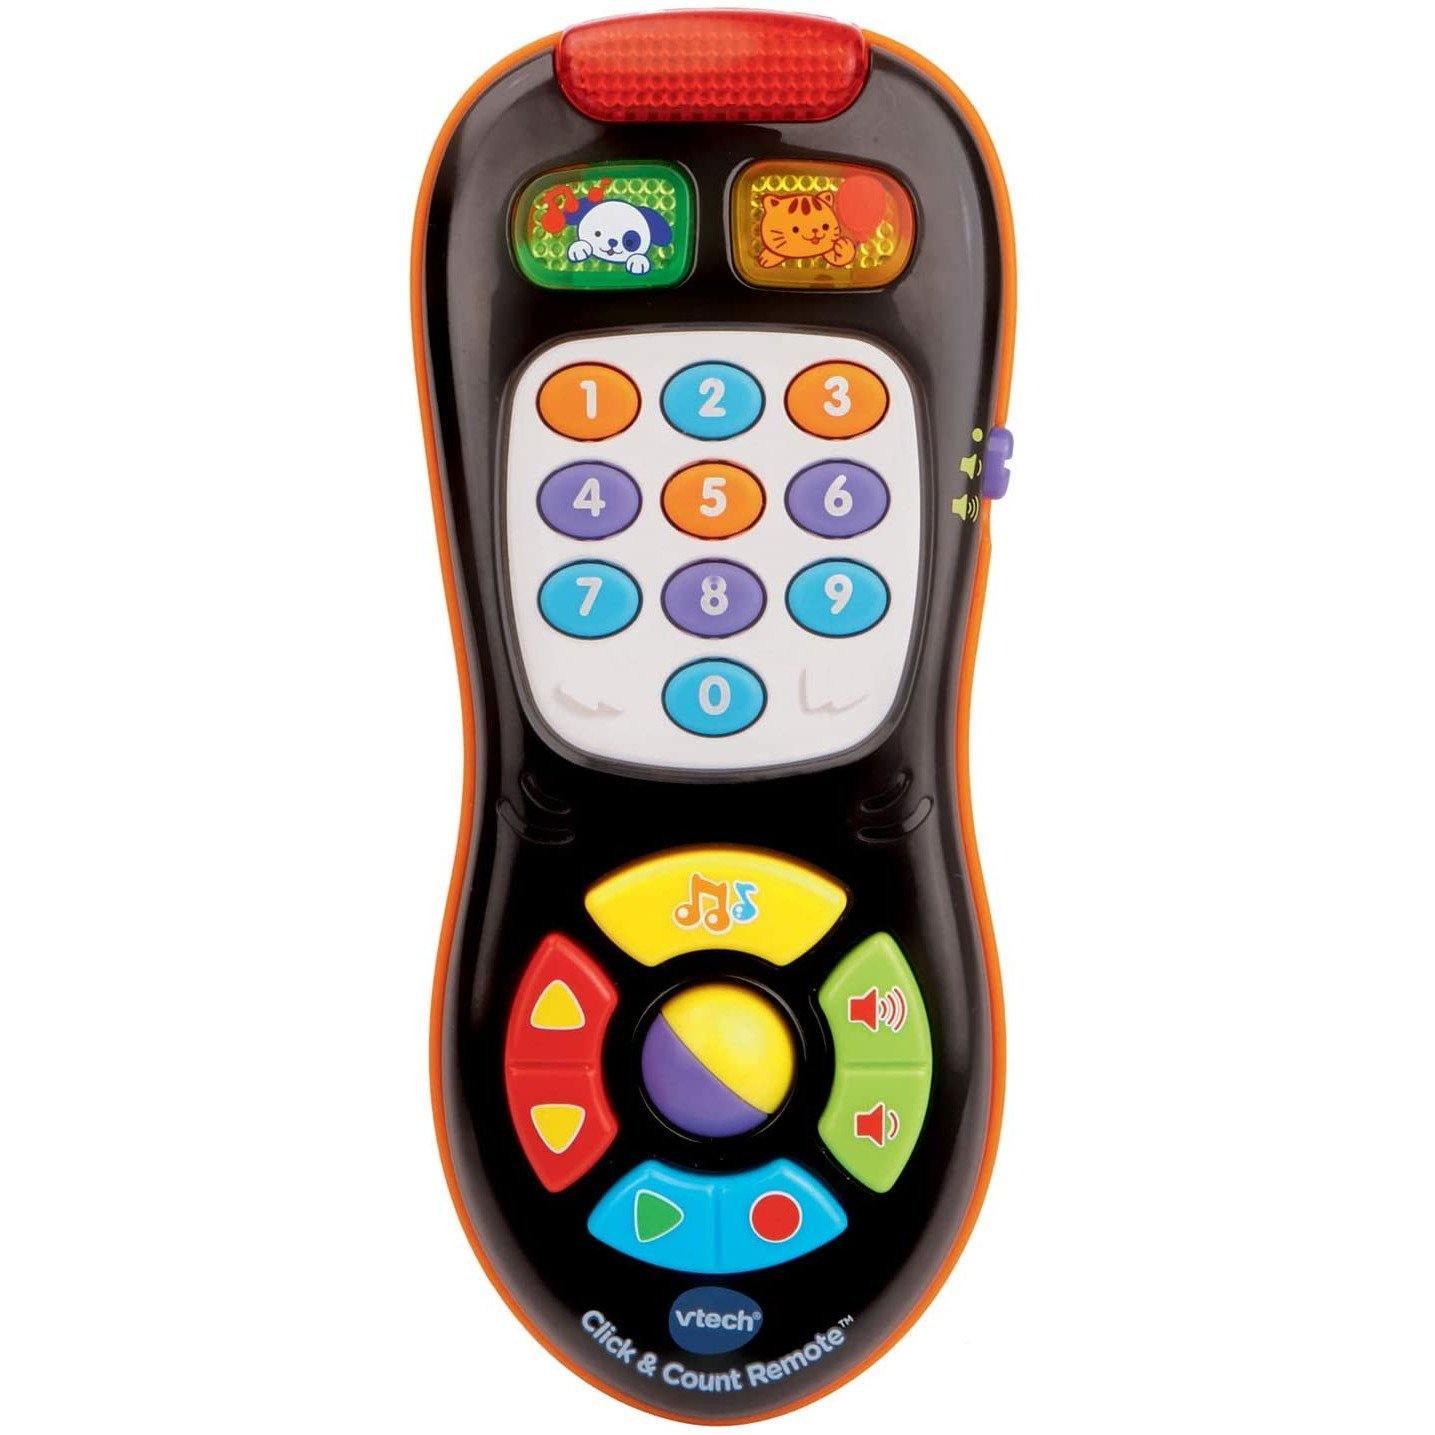 VTech Click & Count Remote, Black - BumbleToys - 6M+, Boys, Electronic Learning, Girls, Learning Toys